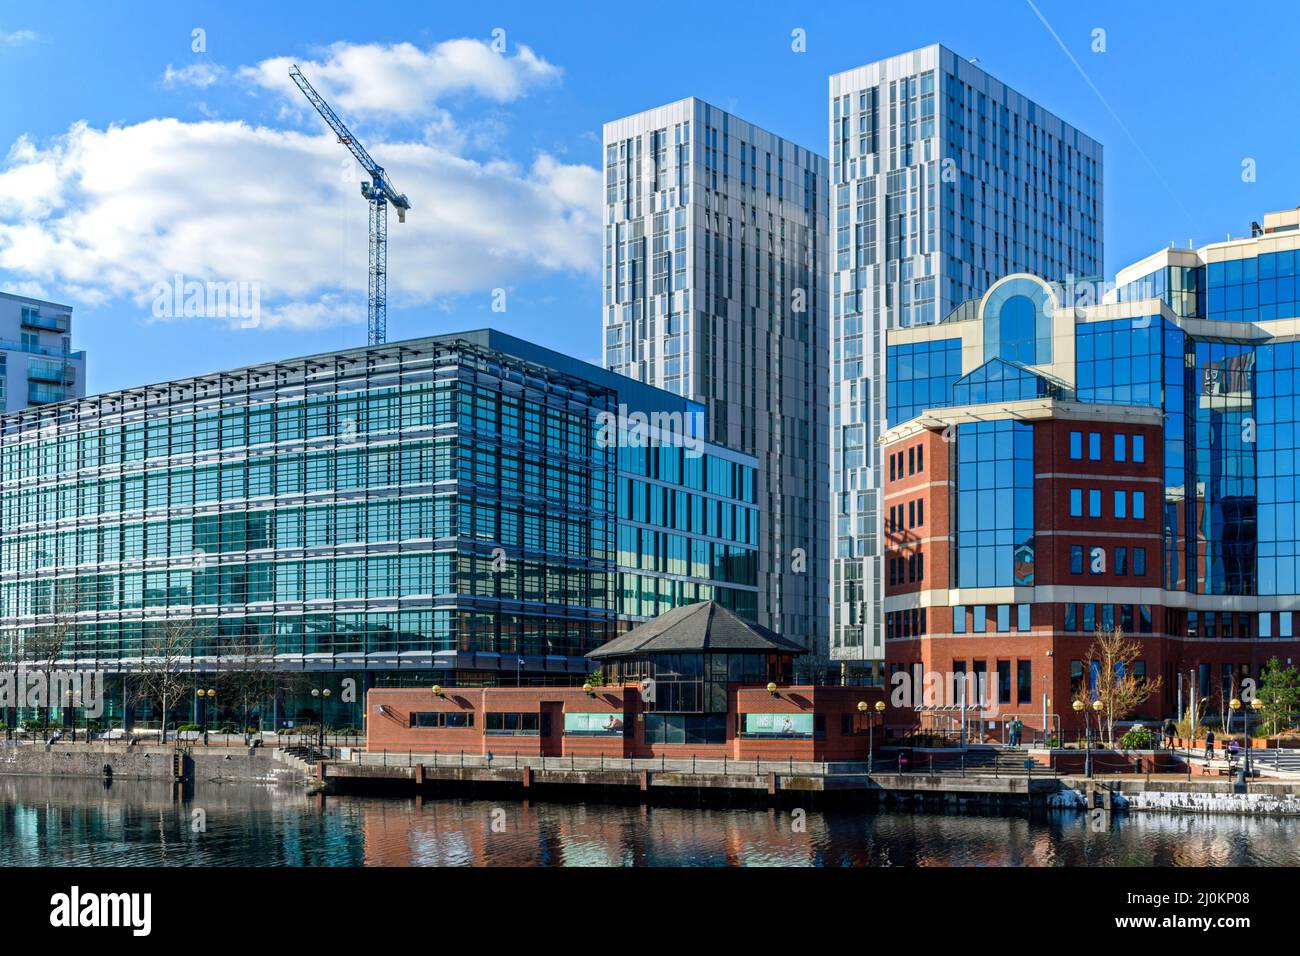 The X1 MediaCity apartment blocks and the Bupa Place building (formerly the Regent office block), from Erie Basin, Salford Quays, Manchester, UK Stock Photo